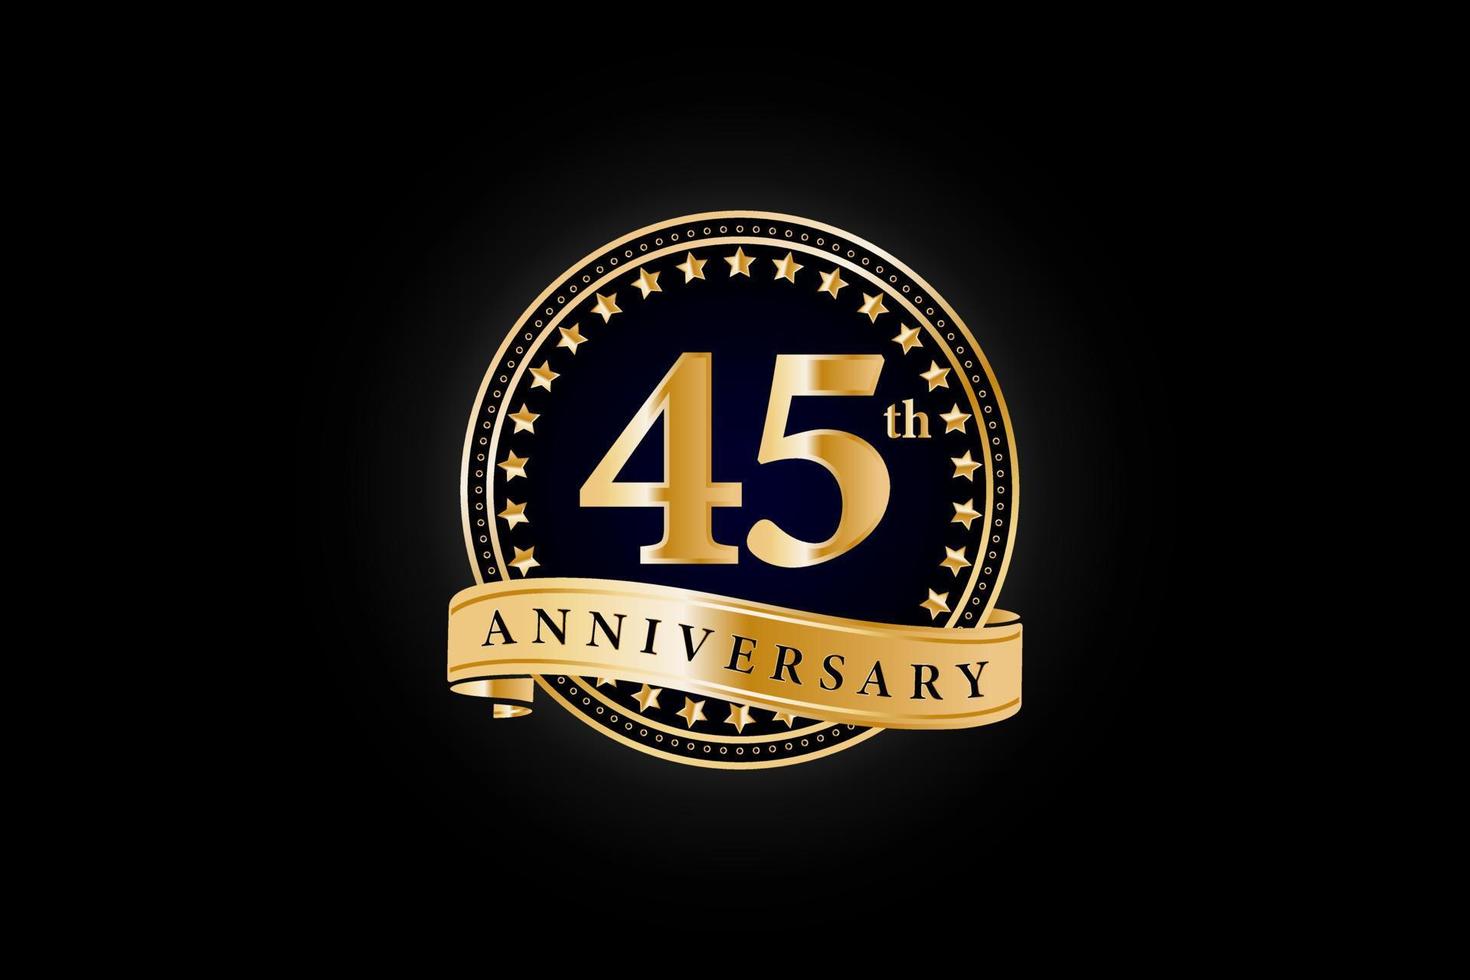 45th Anniversary golden gold logo with ring and gold ribbon isolated on black background, vector design for celebration.